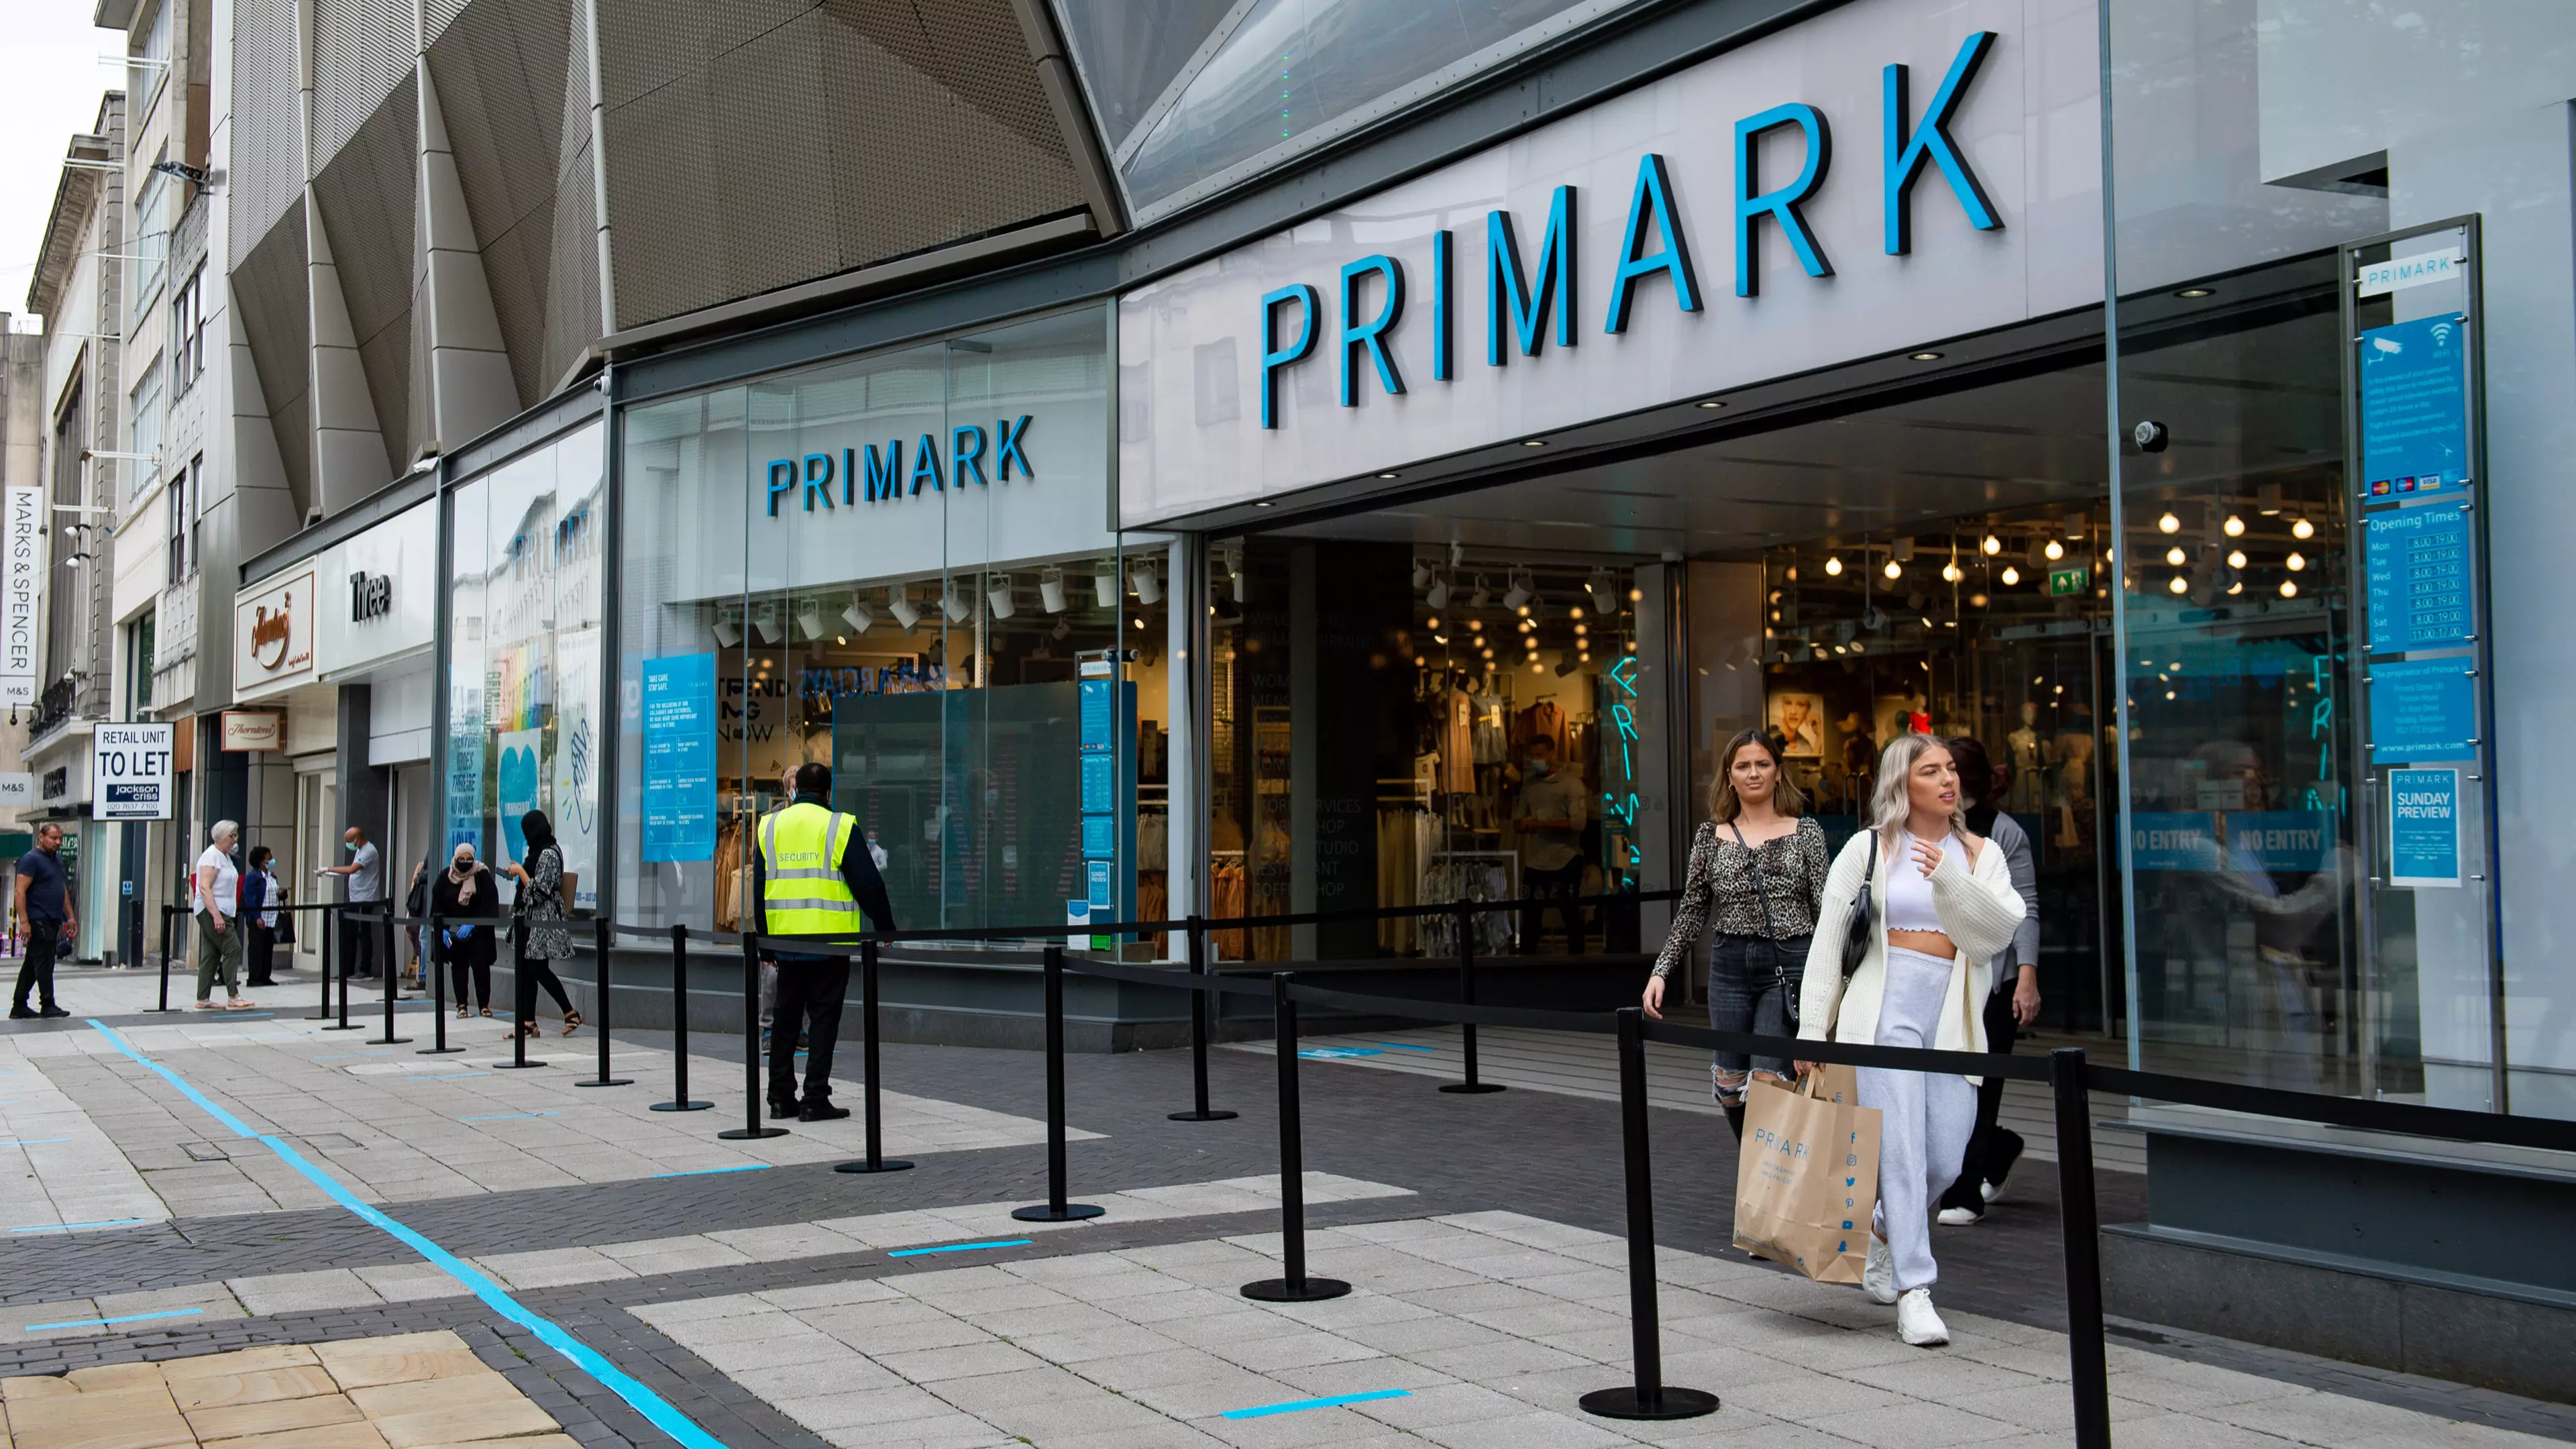 Primark Superfans Can Now Buy An Air Freshener That Smells Like The Store